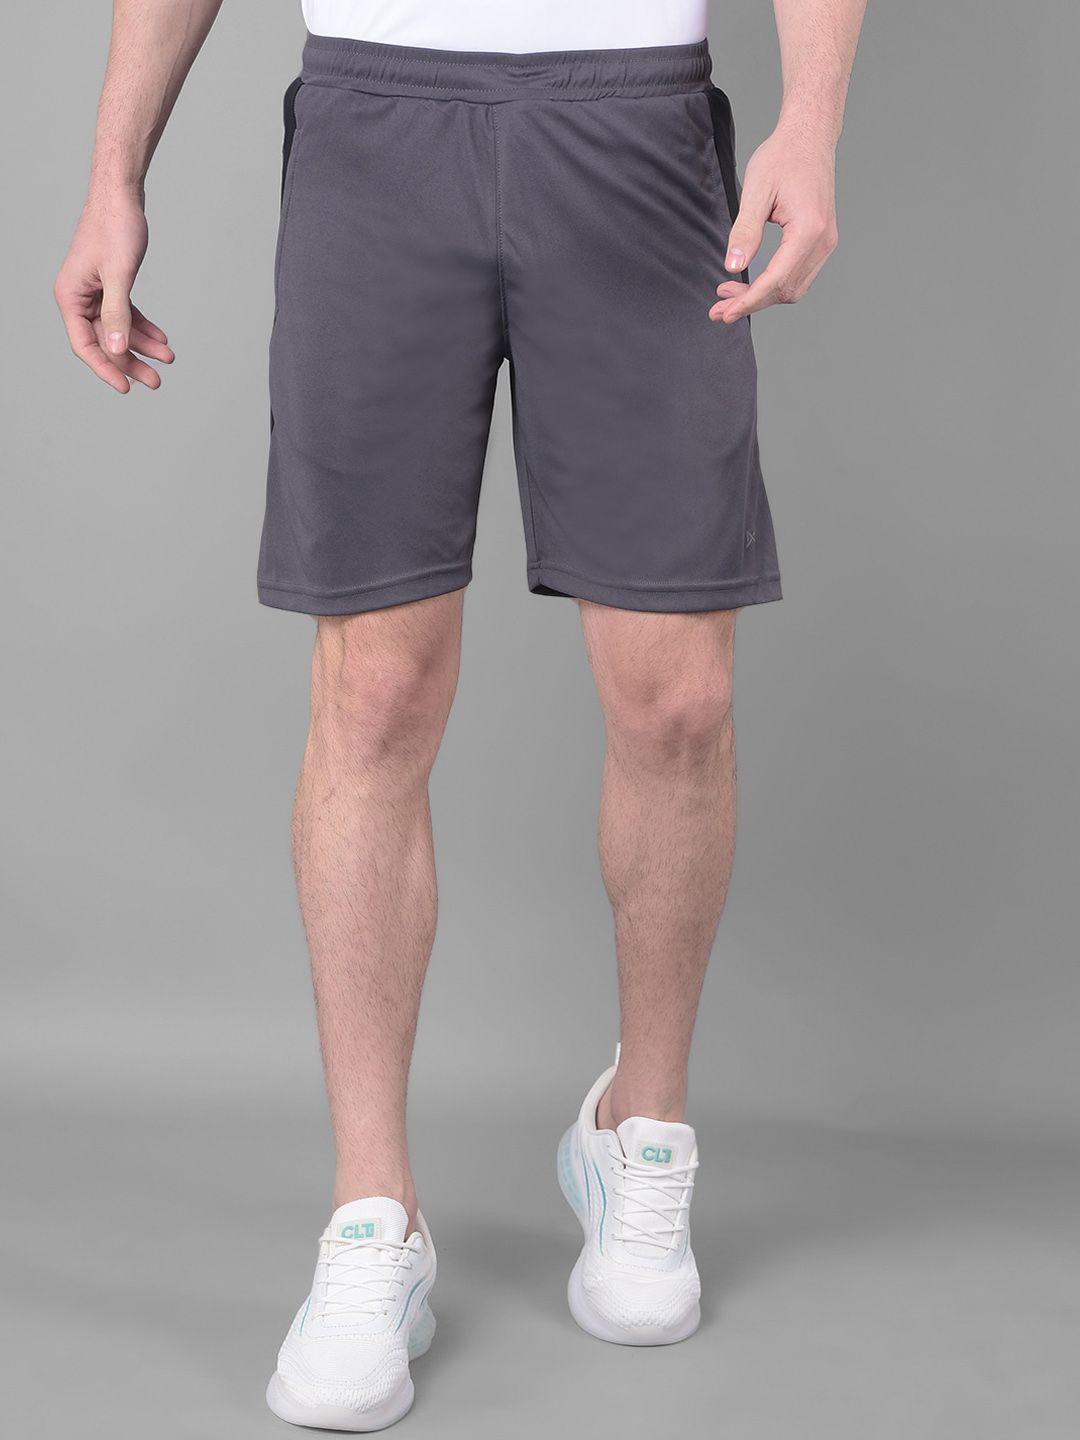 force nxt men training or gym sports shorts with antimicrobial technology